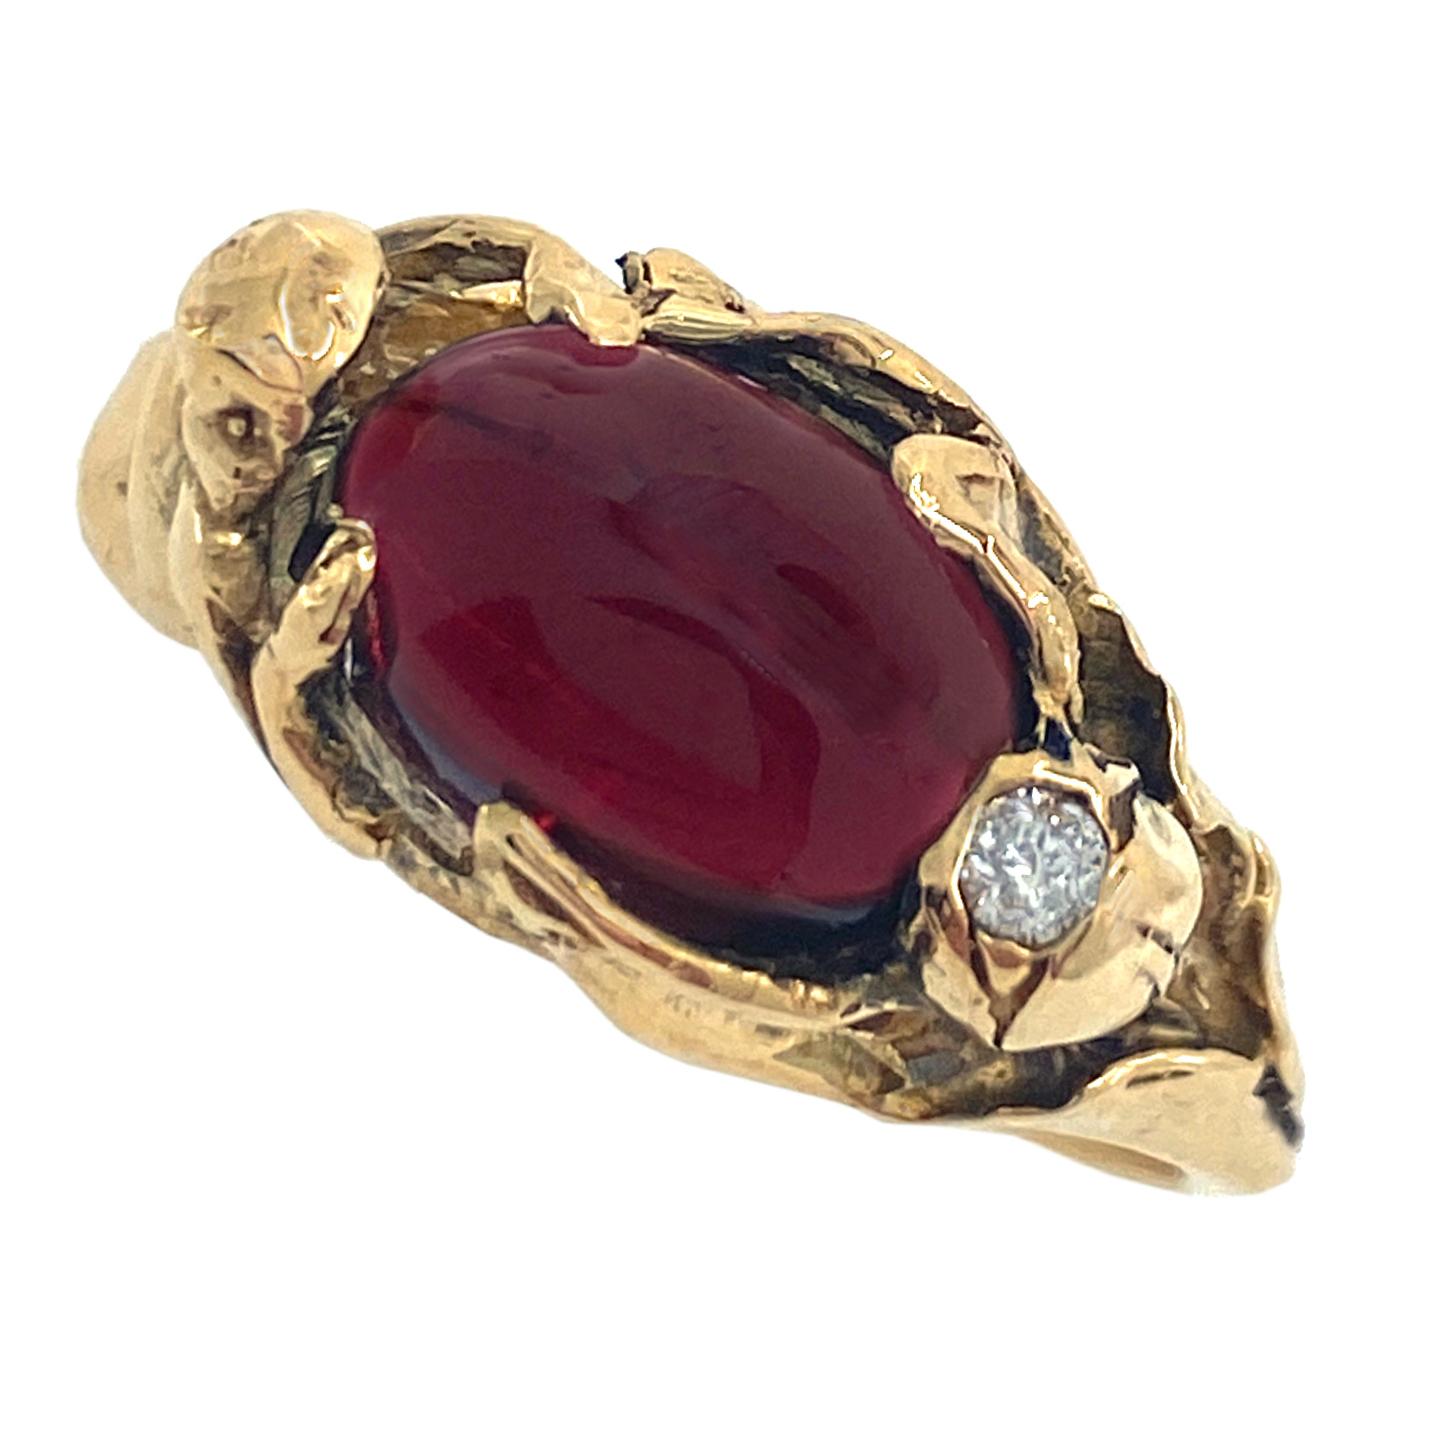 This one-of-a-kind ring was made by Eytan Brandes with naturalistic Art Nouveau jewelry in mind, but it's more abstract and contemporary.  

The deep oxblood red garnet is held in place by a tulip on one side and a reclining lady on the other, and